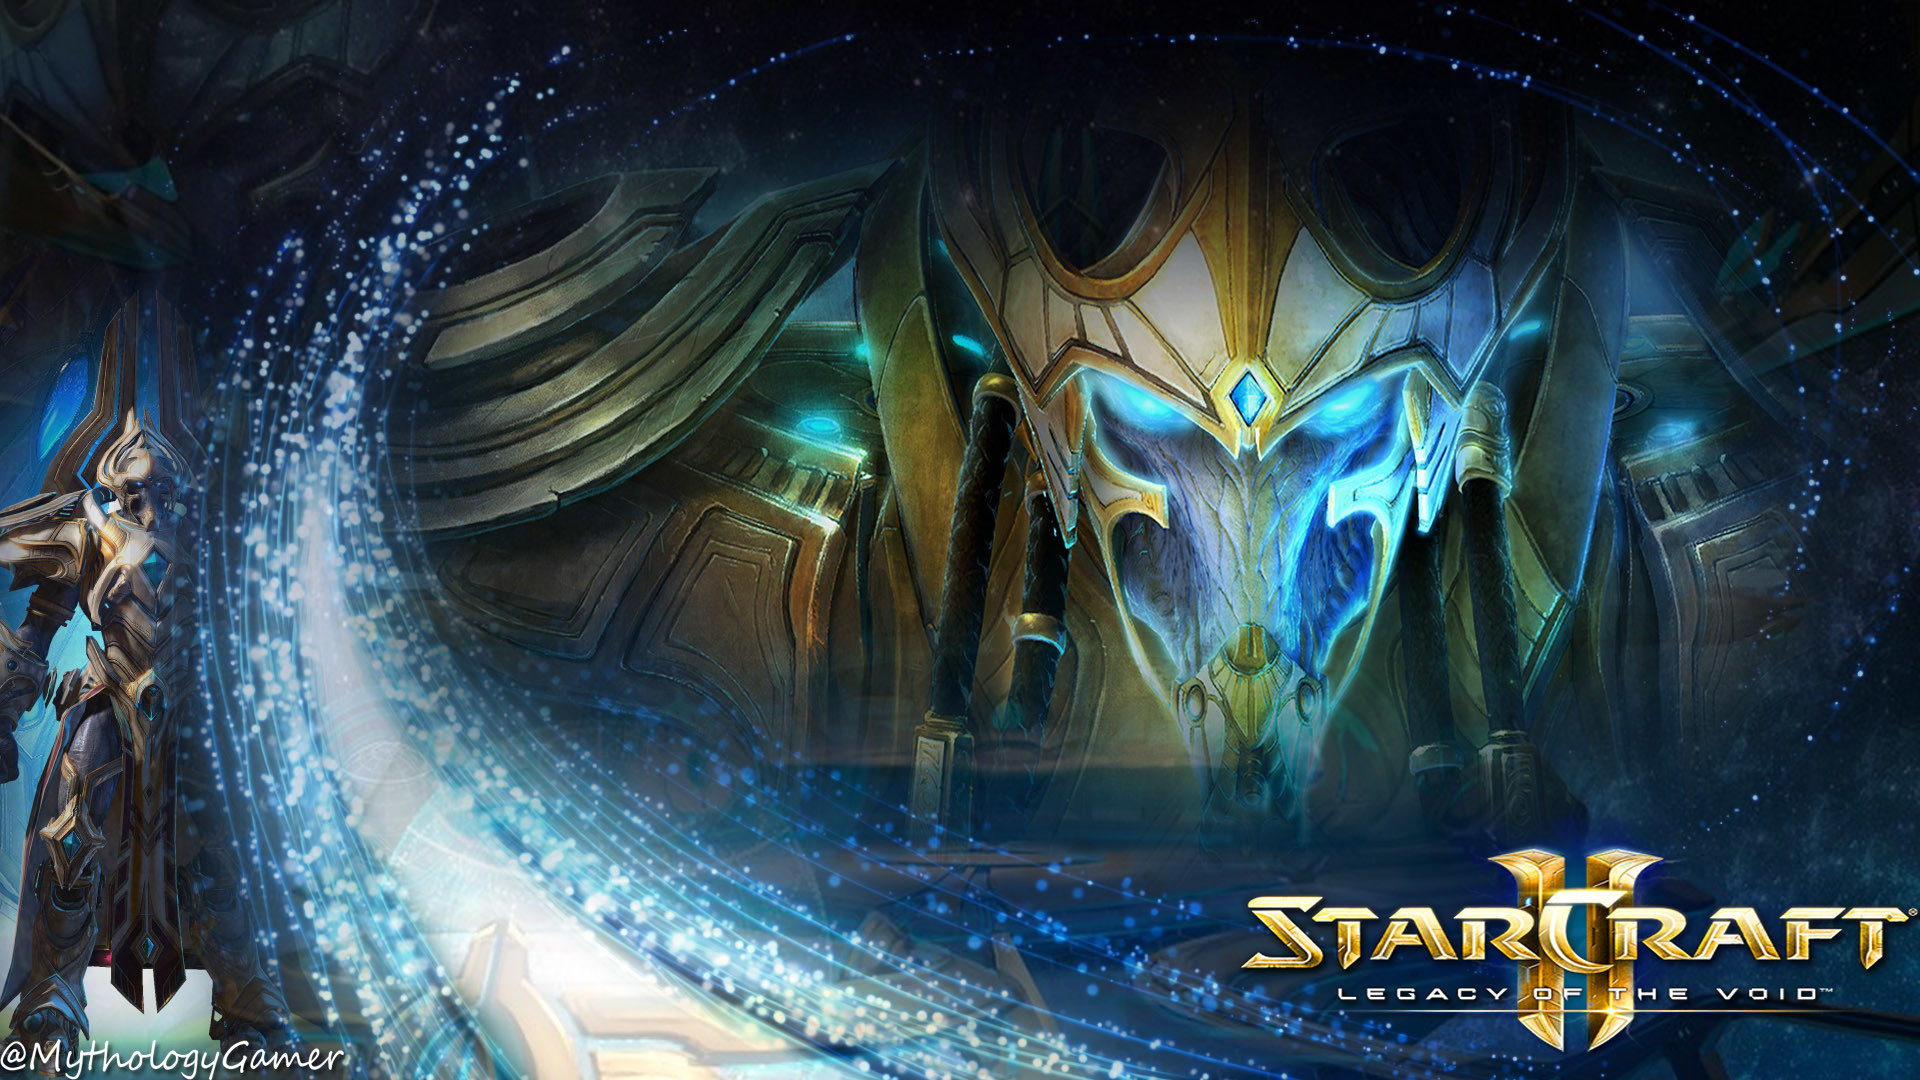 1920x1080 Starcraft 2: Legacy of the Void Images